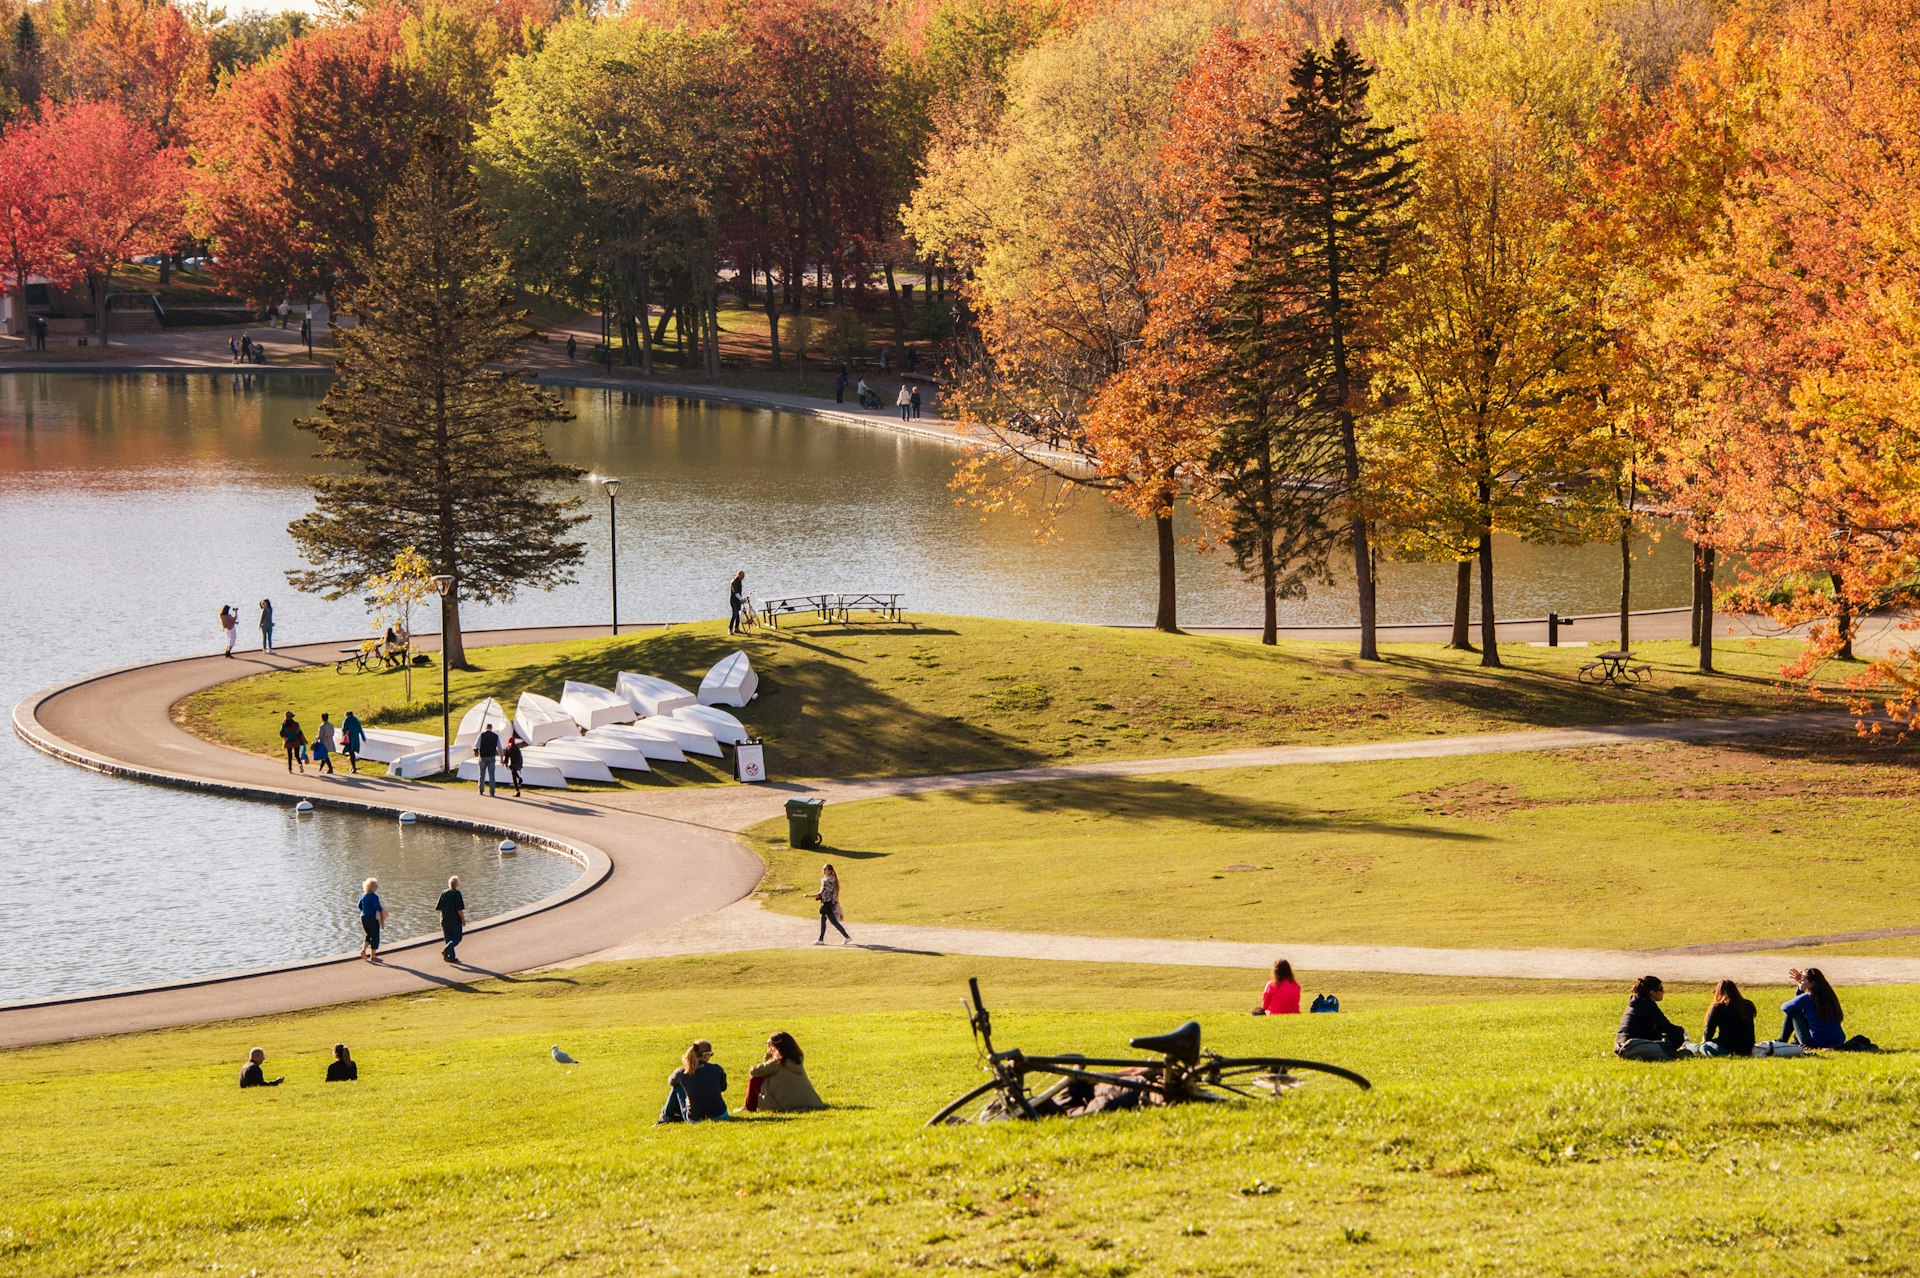 People in small groups sit together or play in parkland in autumn